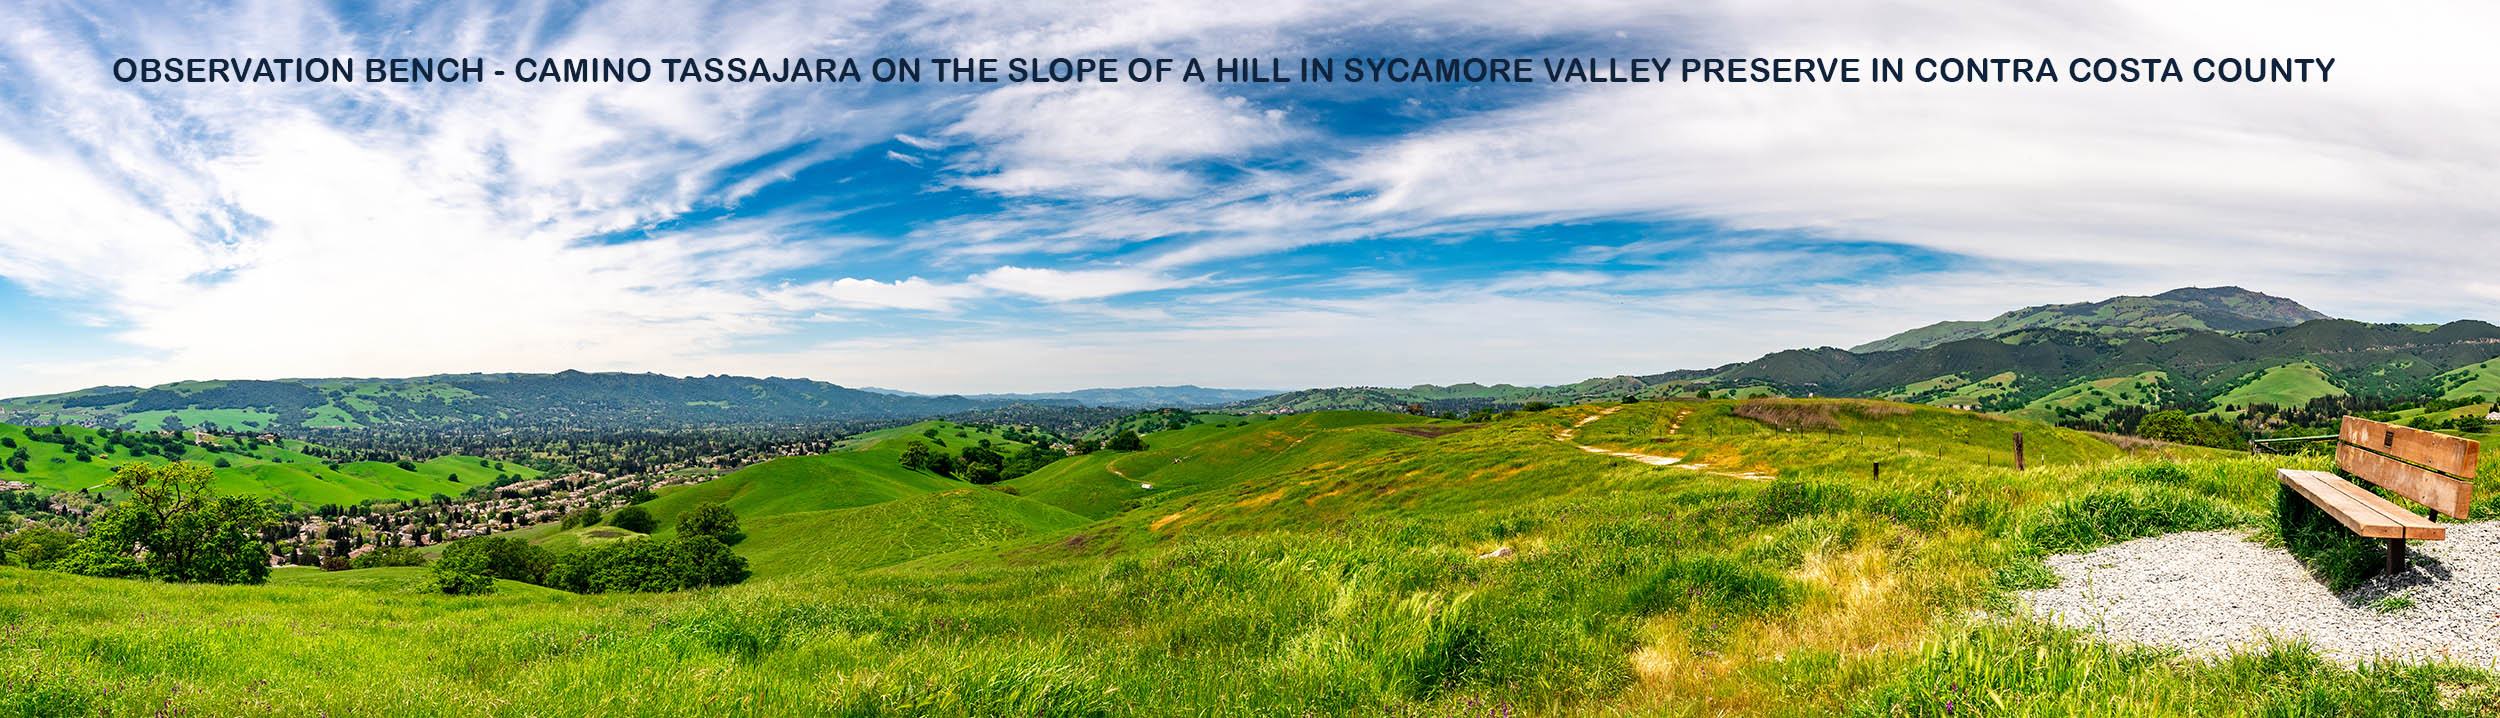 Observation Bench - Camino Tassajara on the slope of a hill in Sycamore Valley Preserve In Contra Costa County - Courtesy of Contra Costa Divorce attorneys @ Ryan Family Law